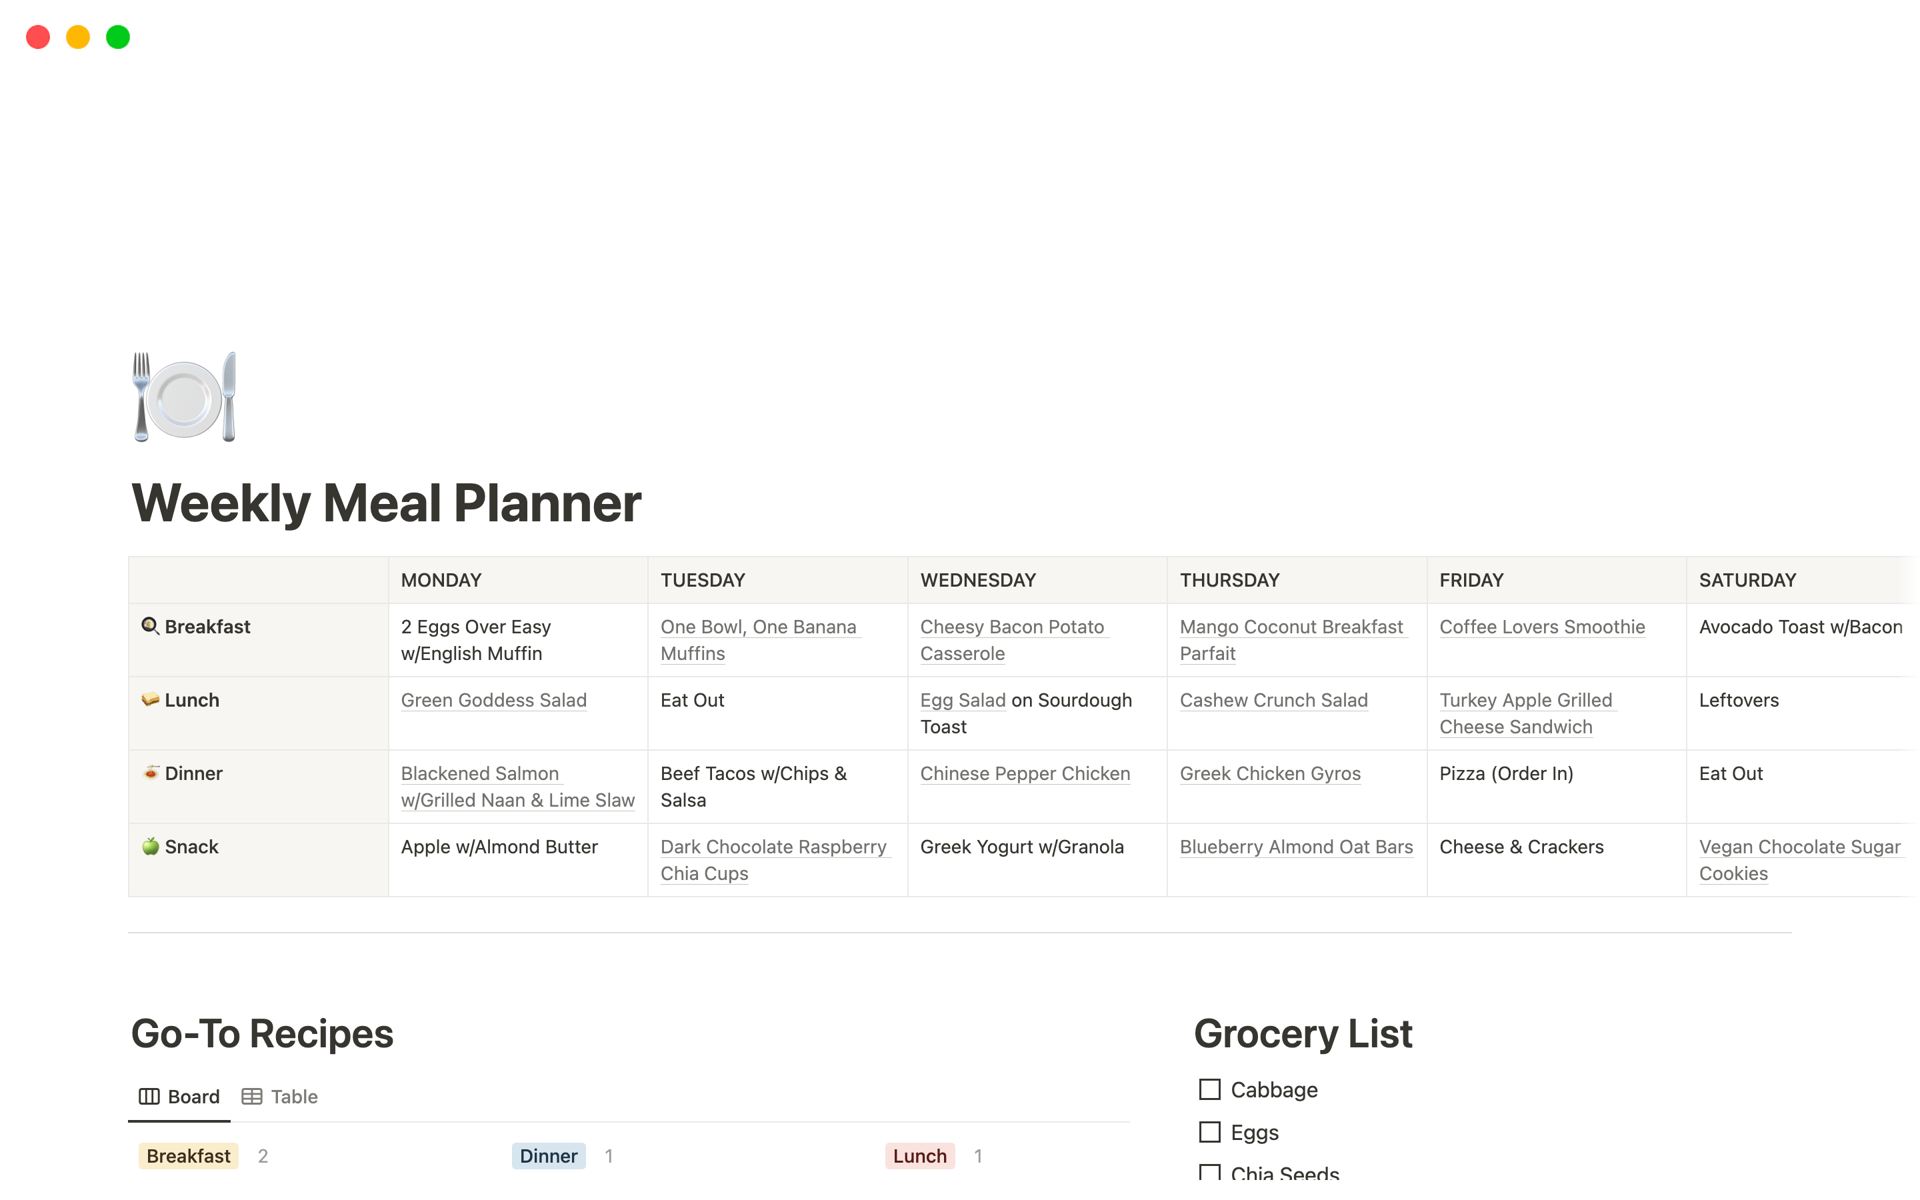 This planner is designed to streamline your meal preparation process, helping you stay organized and inspired in the kitchen throughout the week by having all your meal-related information in one centralized location.